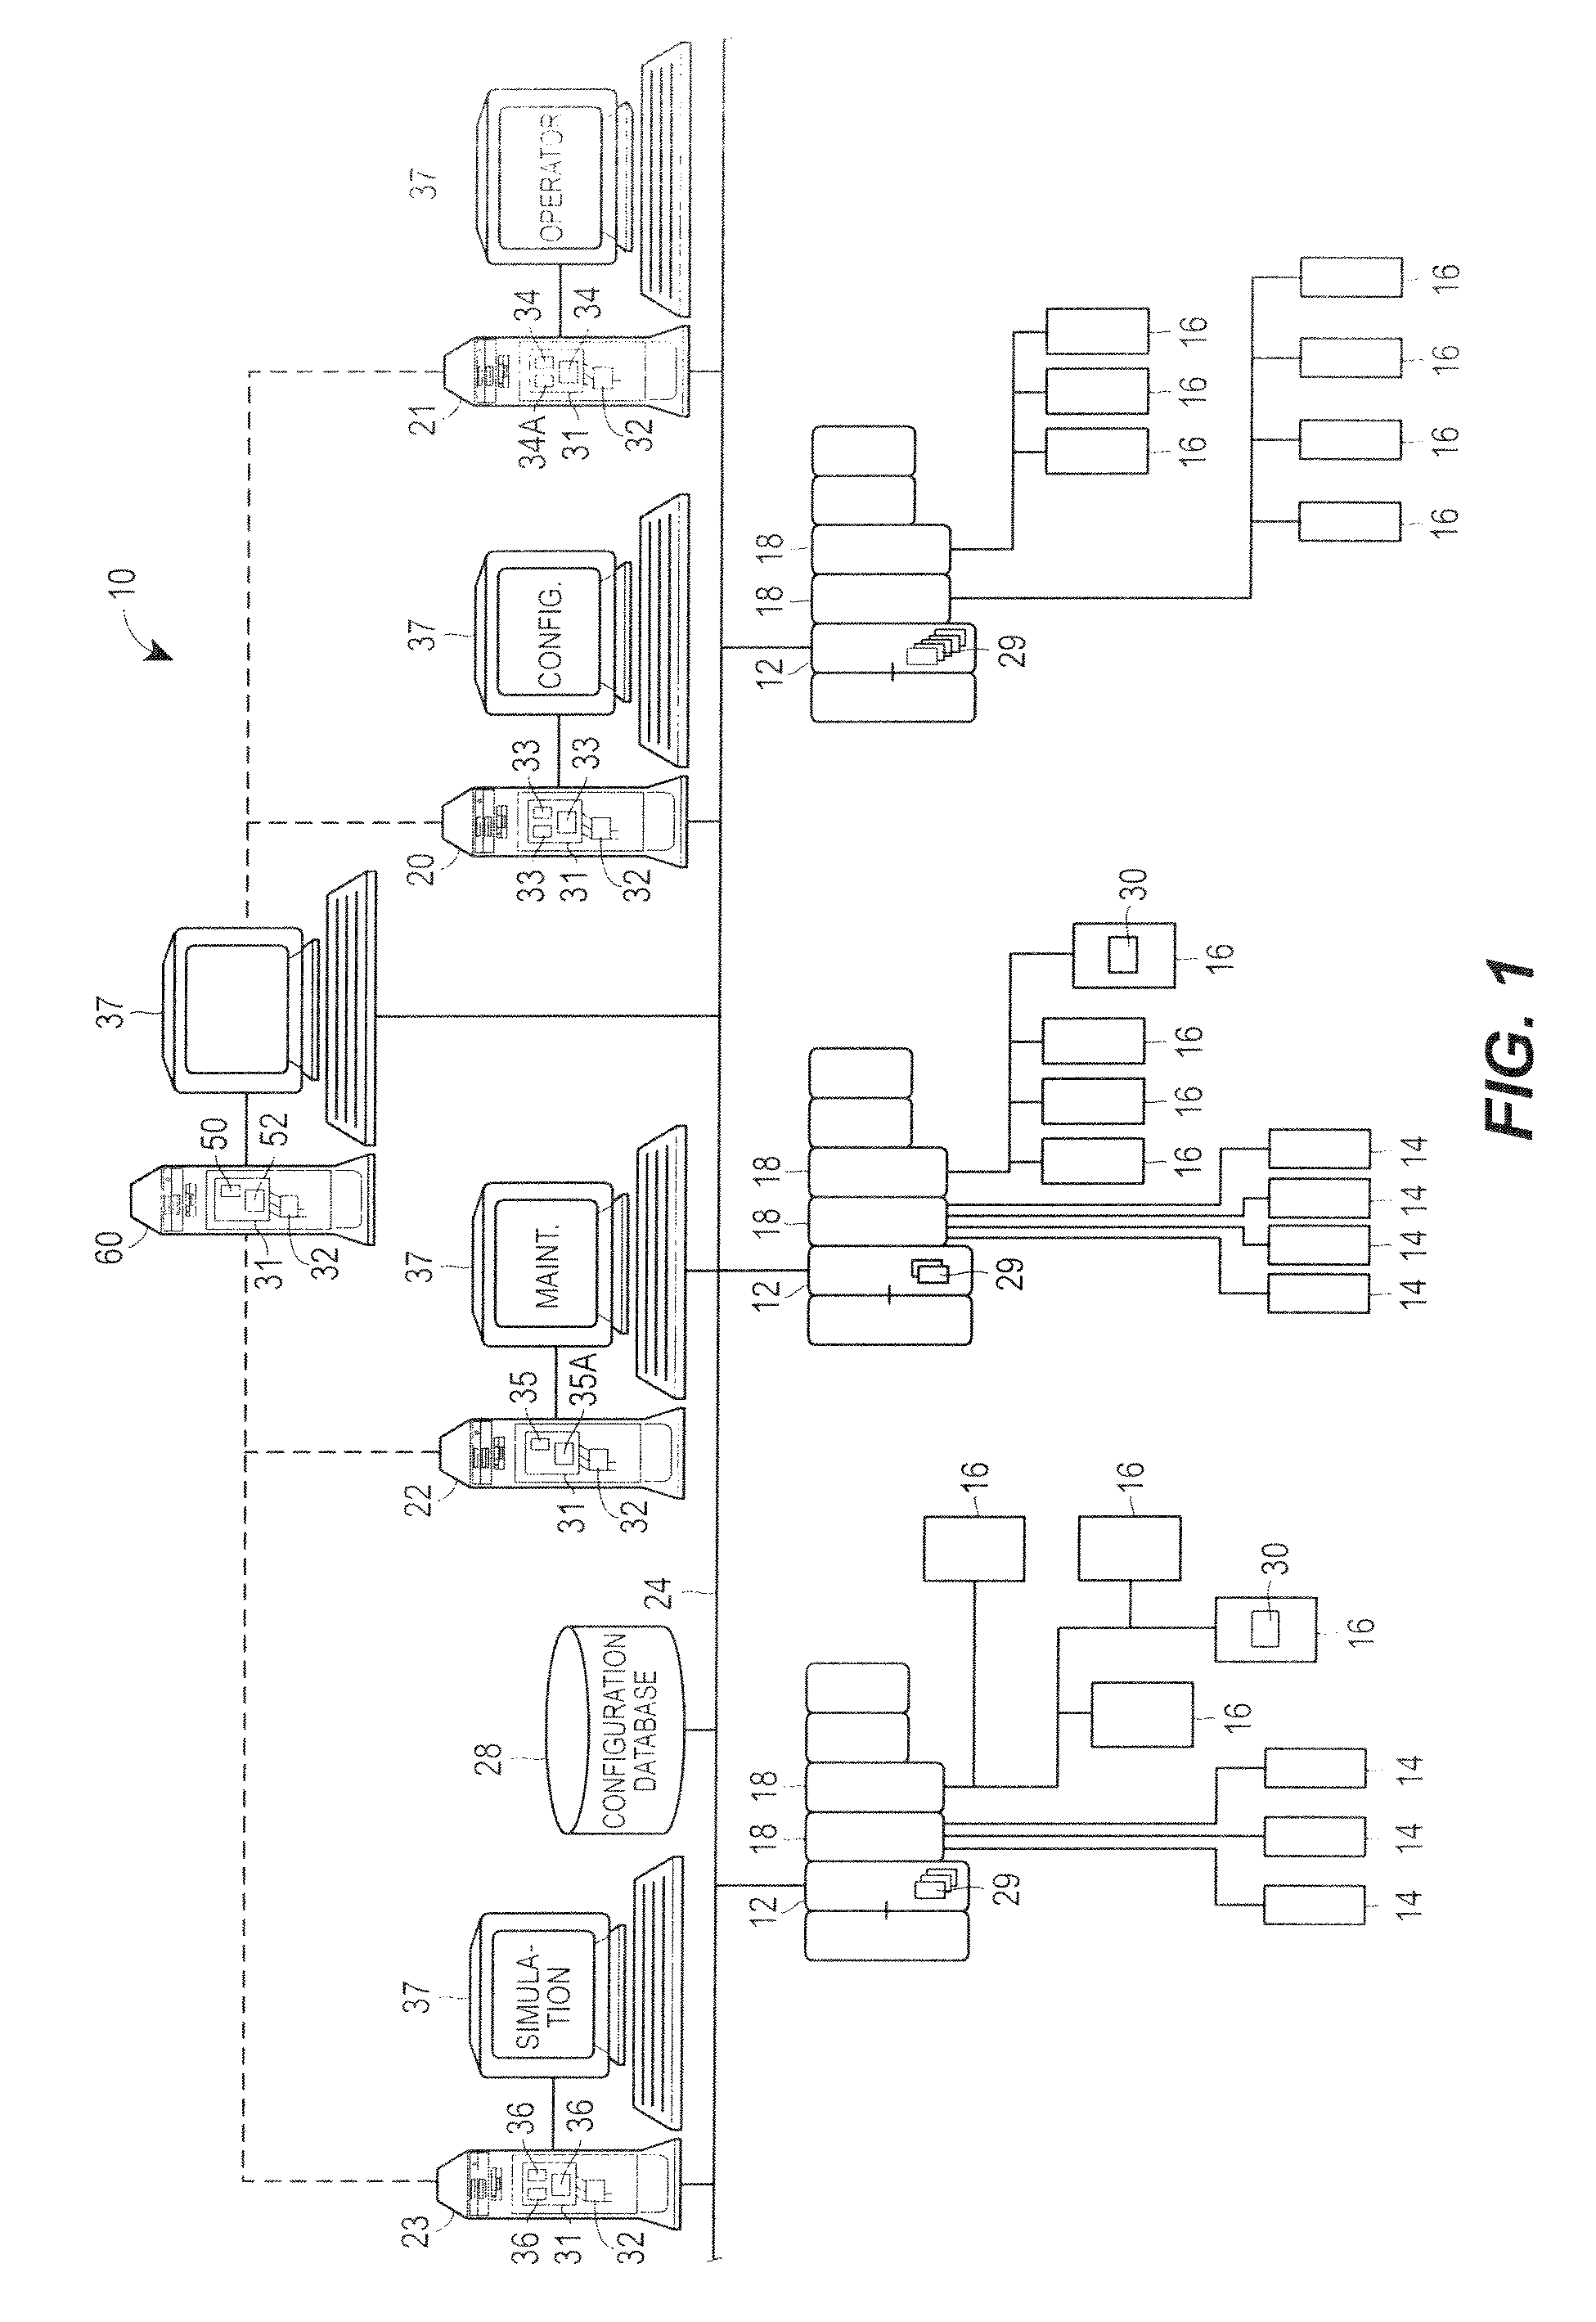 Method for selecting shapes in a graphical display